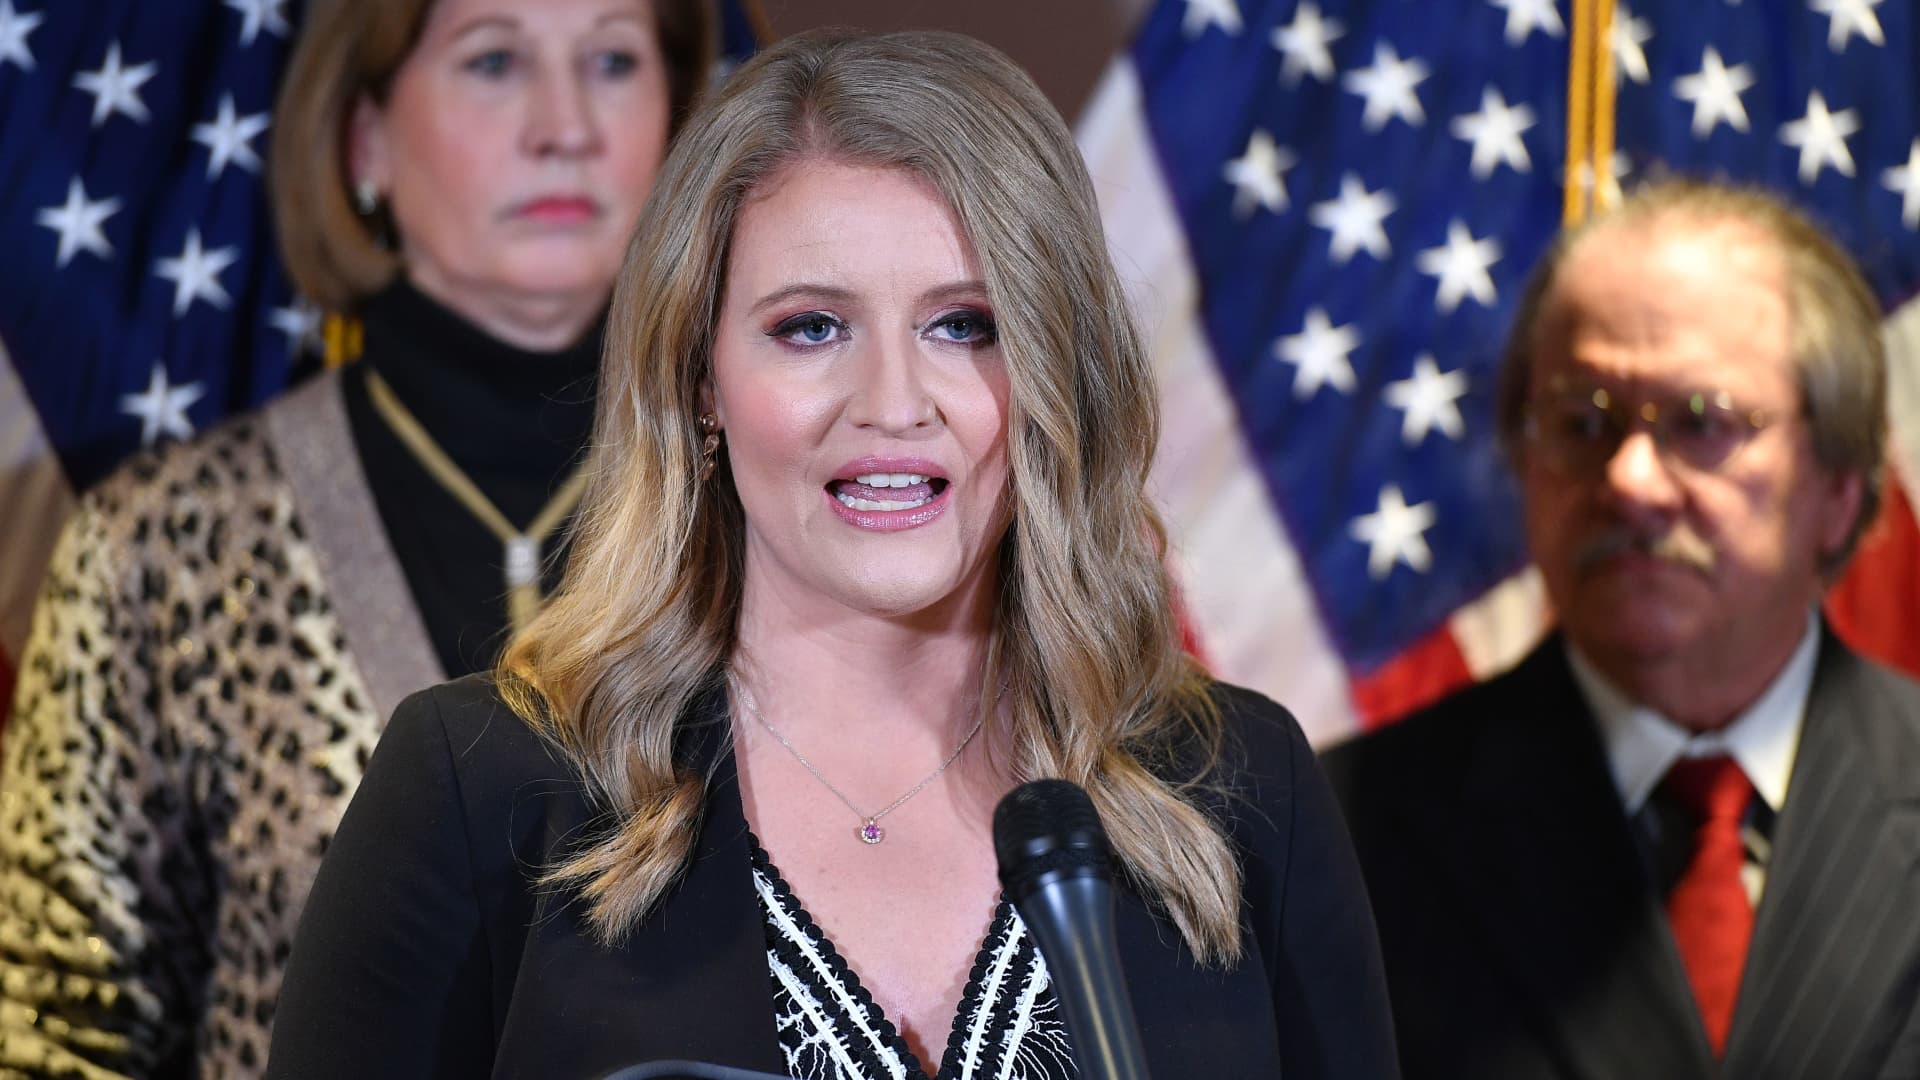 A November 19, 2020 photo shows attorney Jenna Ellis speaking during a press conference at the Republican National Committee headquarters in Washington, DC.